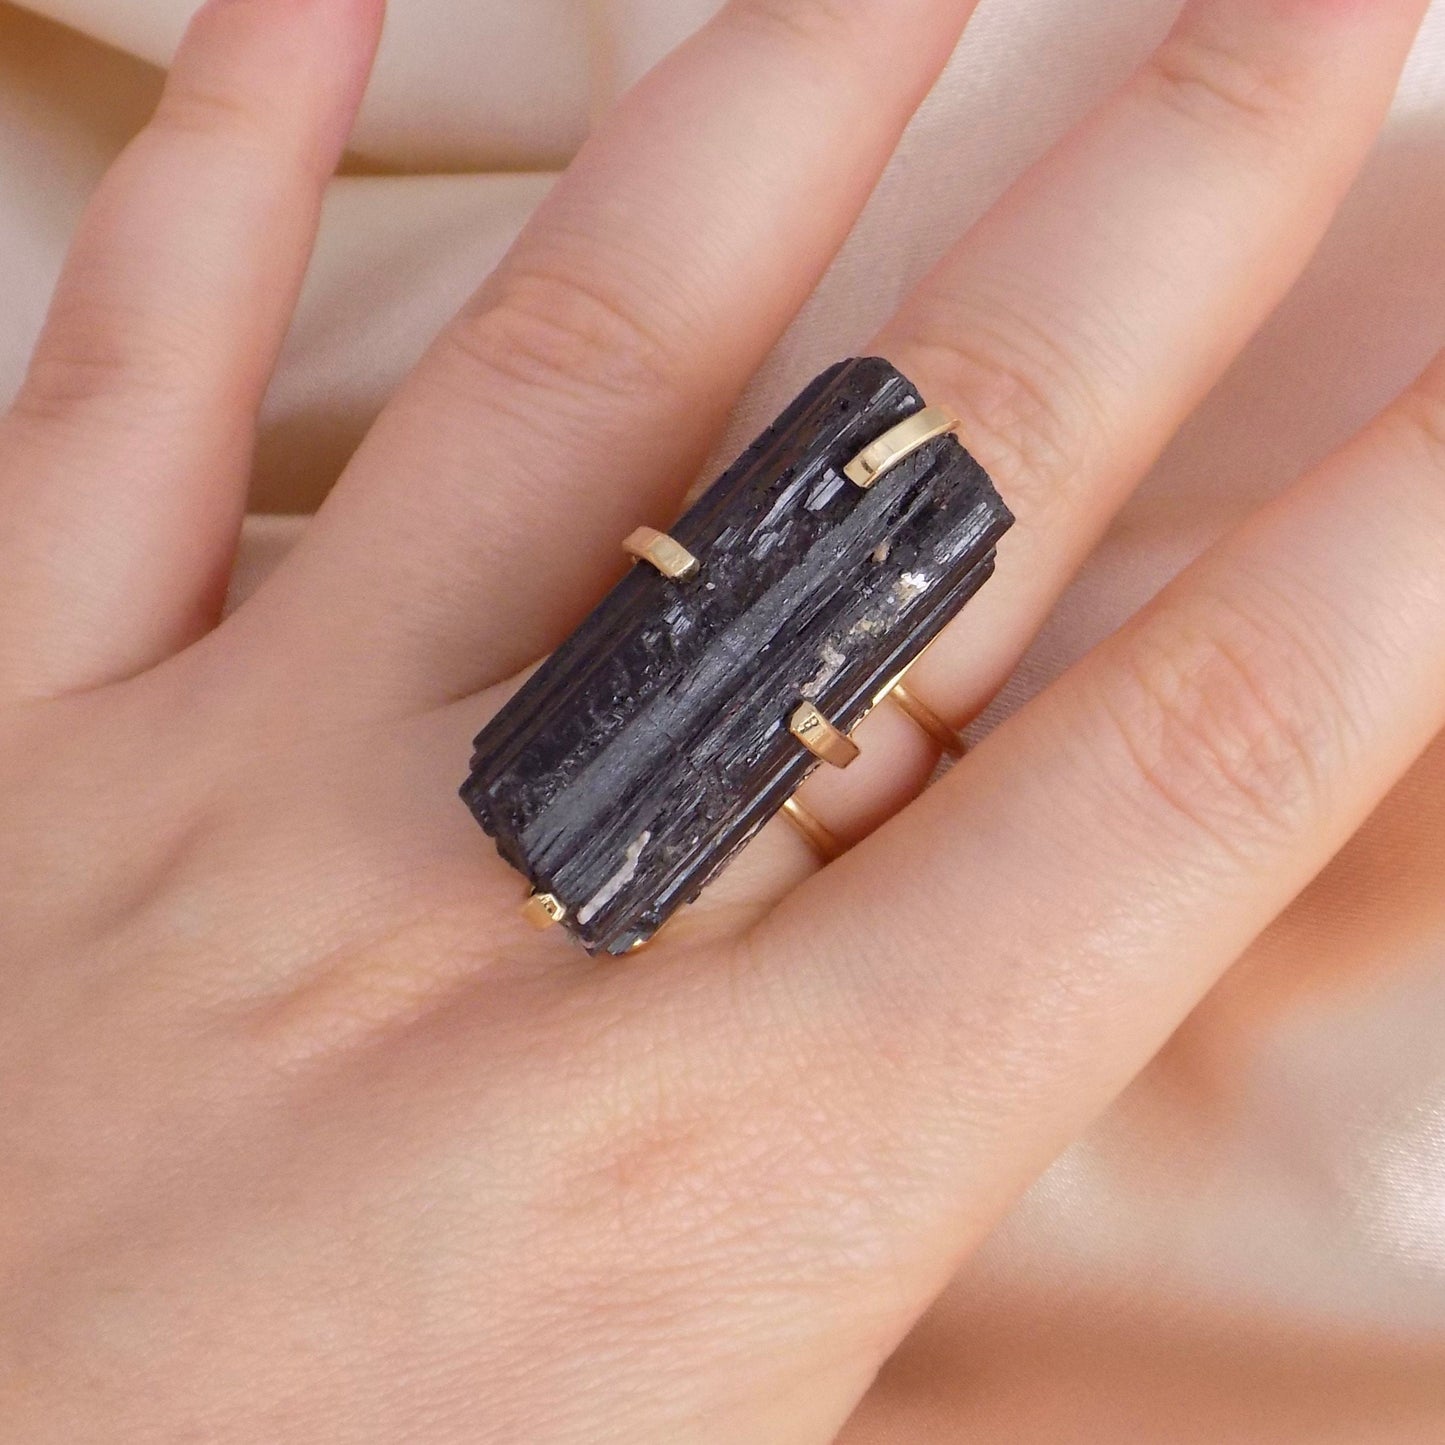 Raw Black Tourmaline Ring Gold Adjustable, Large Black Stone Statement Ring, Mothers Gifts For Her, G15-87